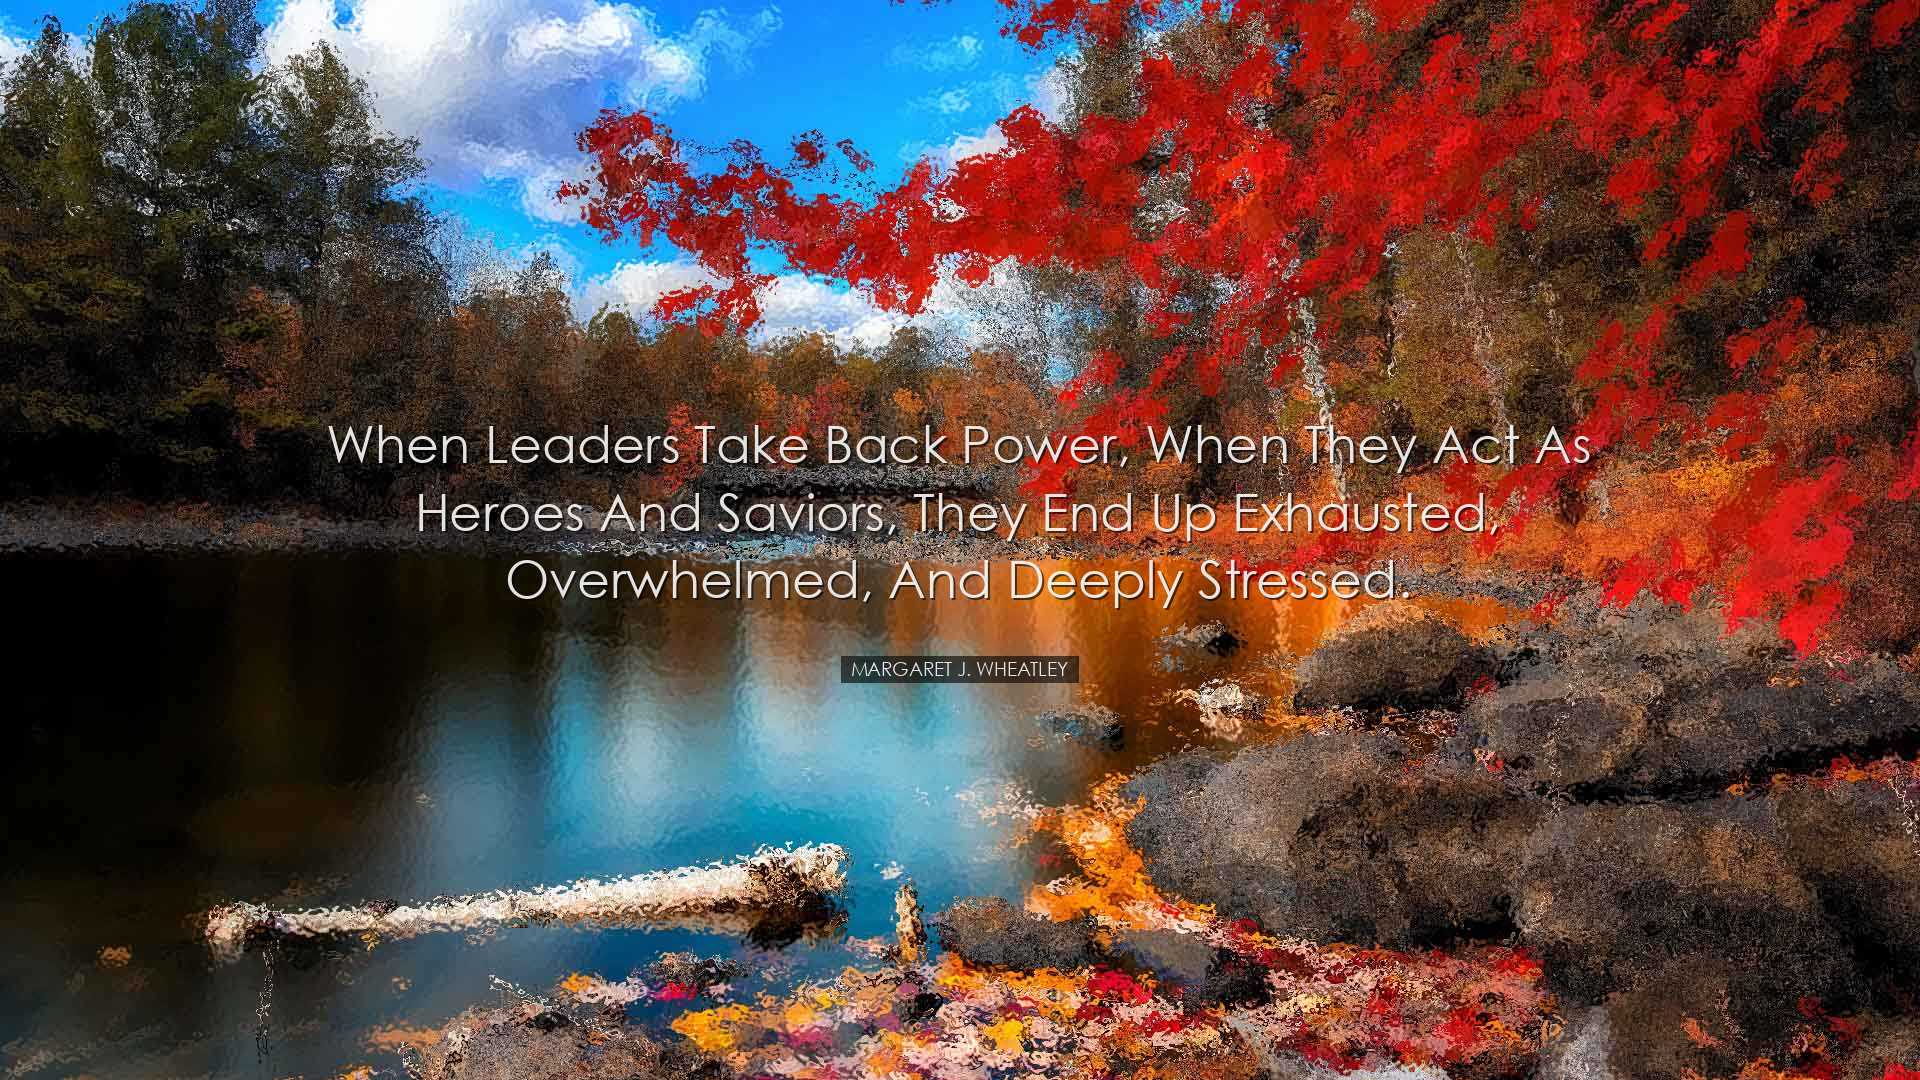 When leaders take back power, when they act as heroes and saviors,